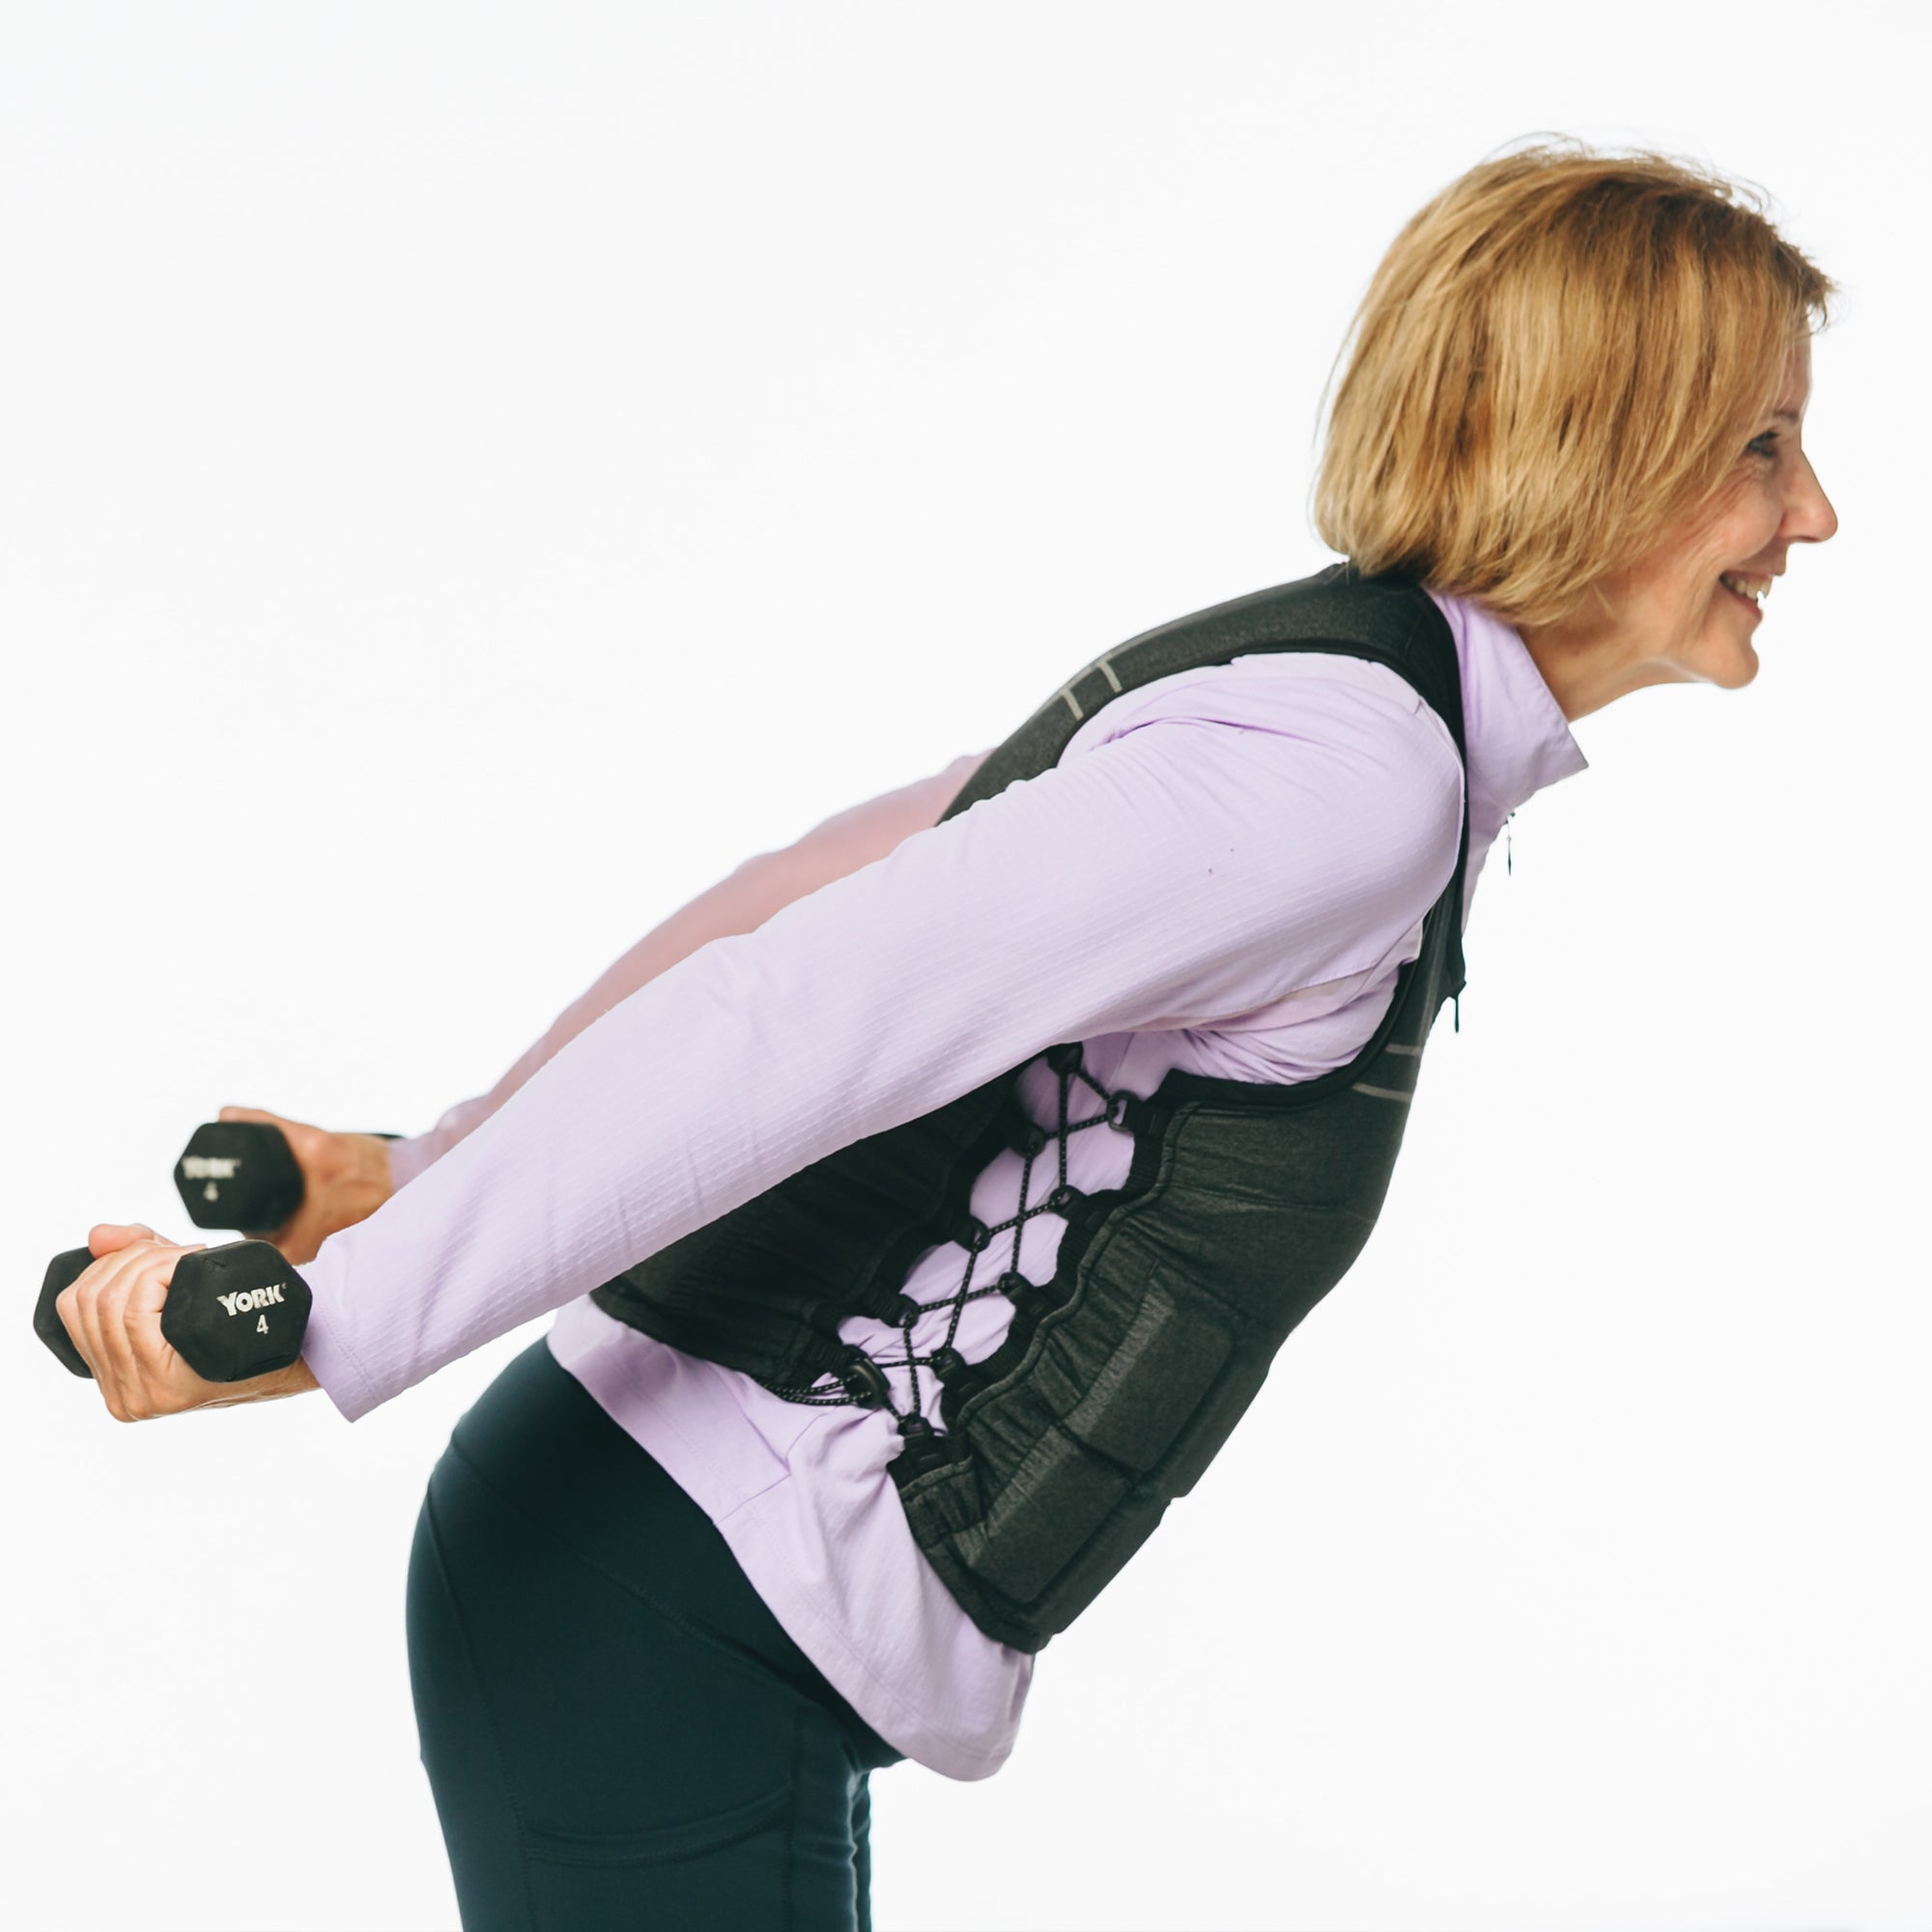 Older female pictured wearing women's weight vest while using dumbbells